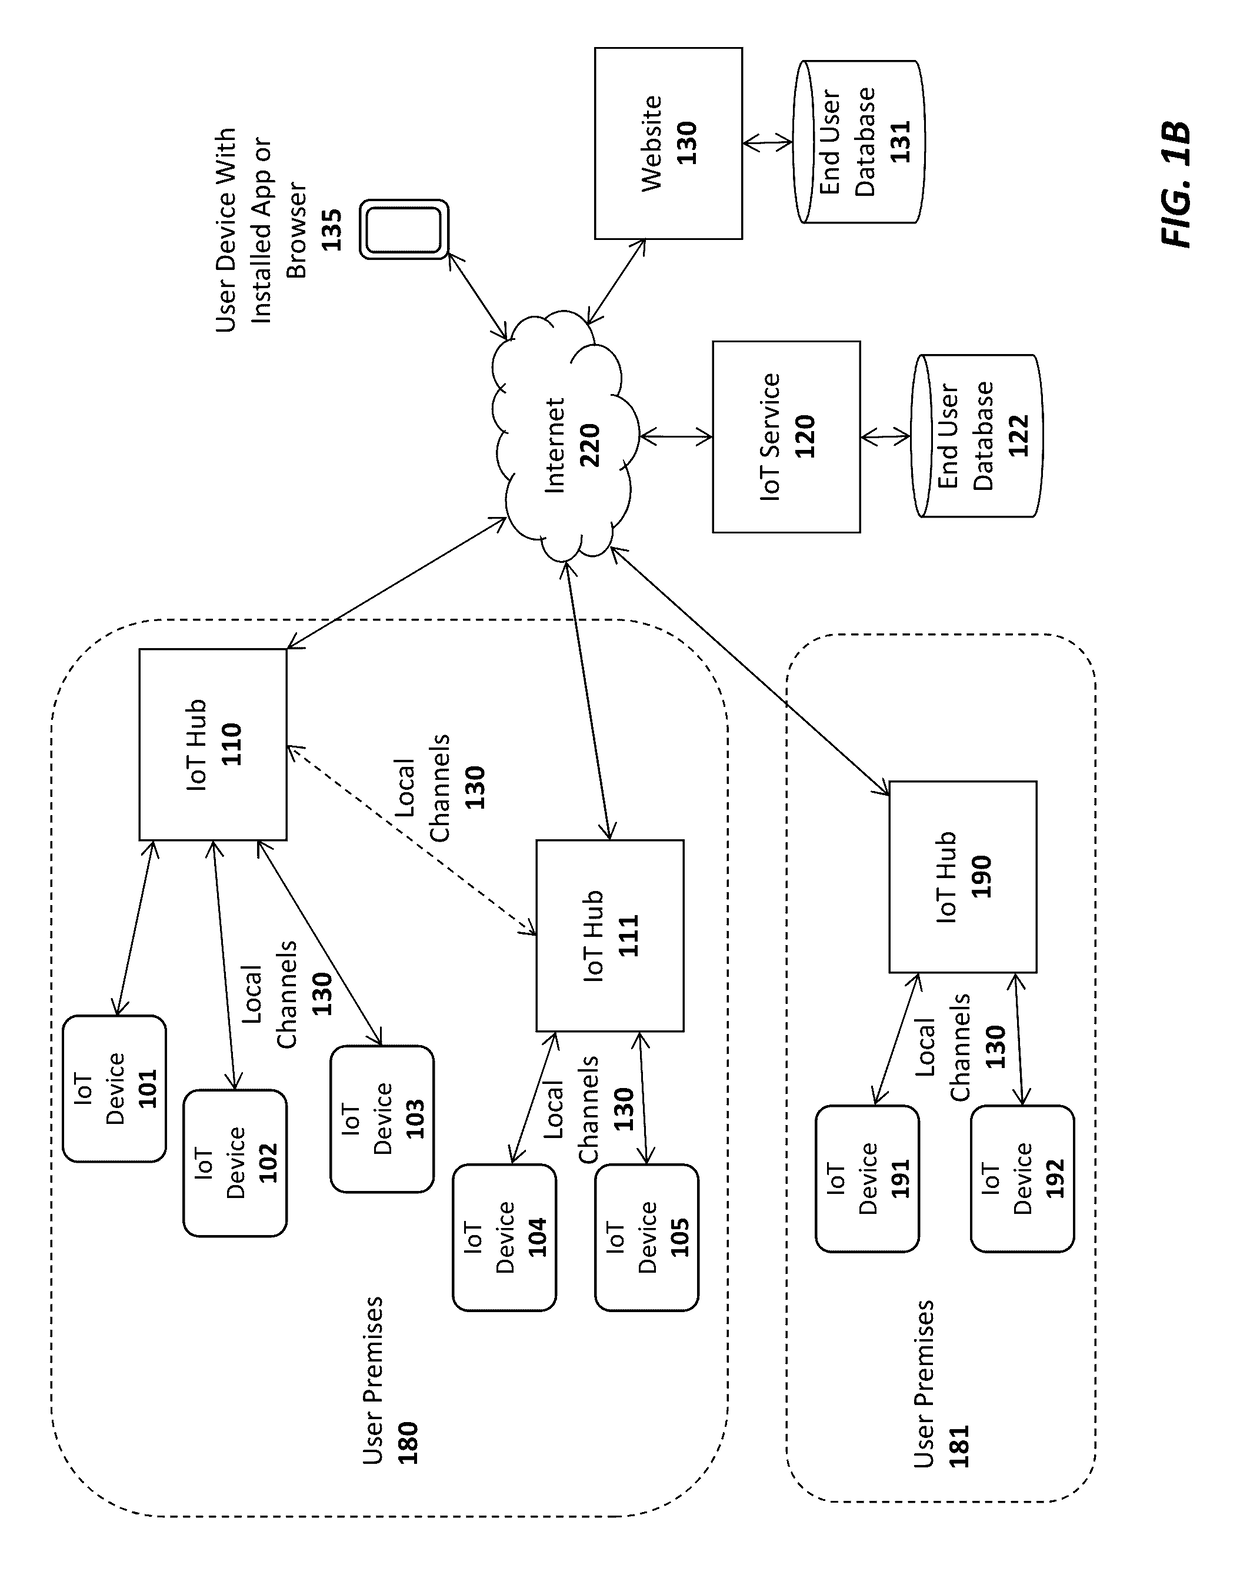 System and method for an internet of things (IOT) gas pump or charging station implementation